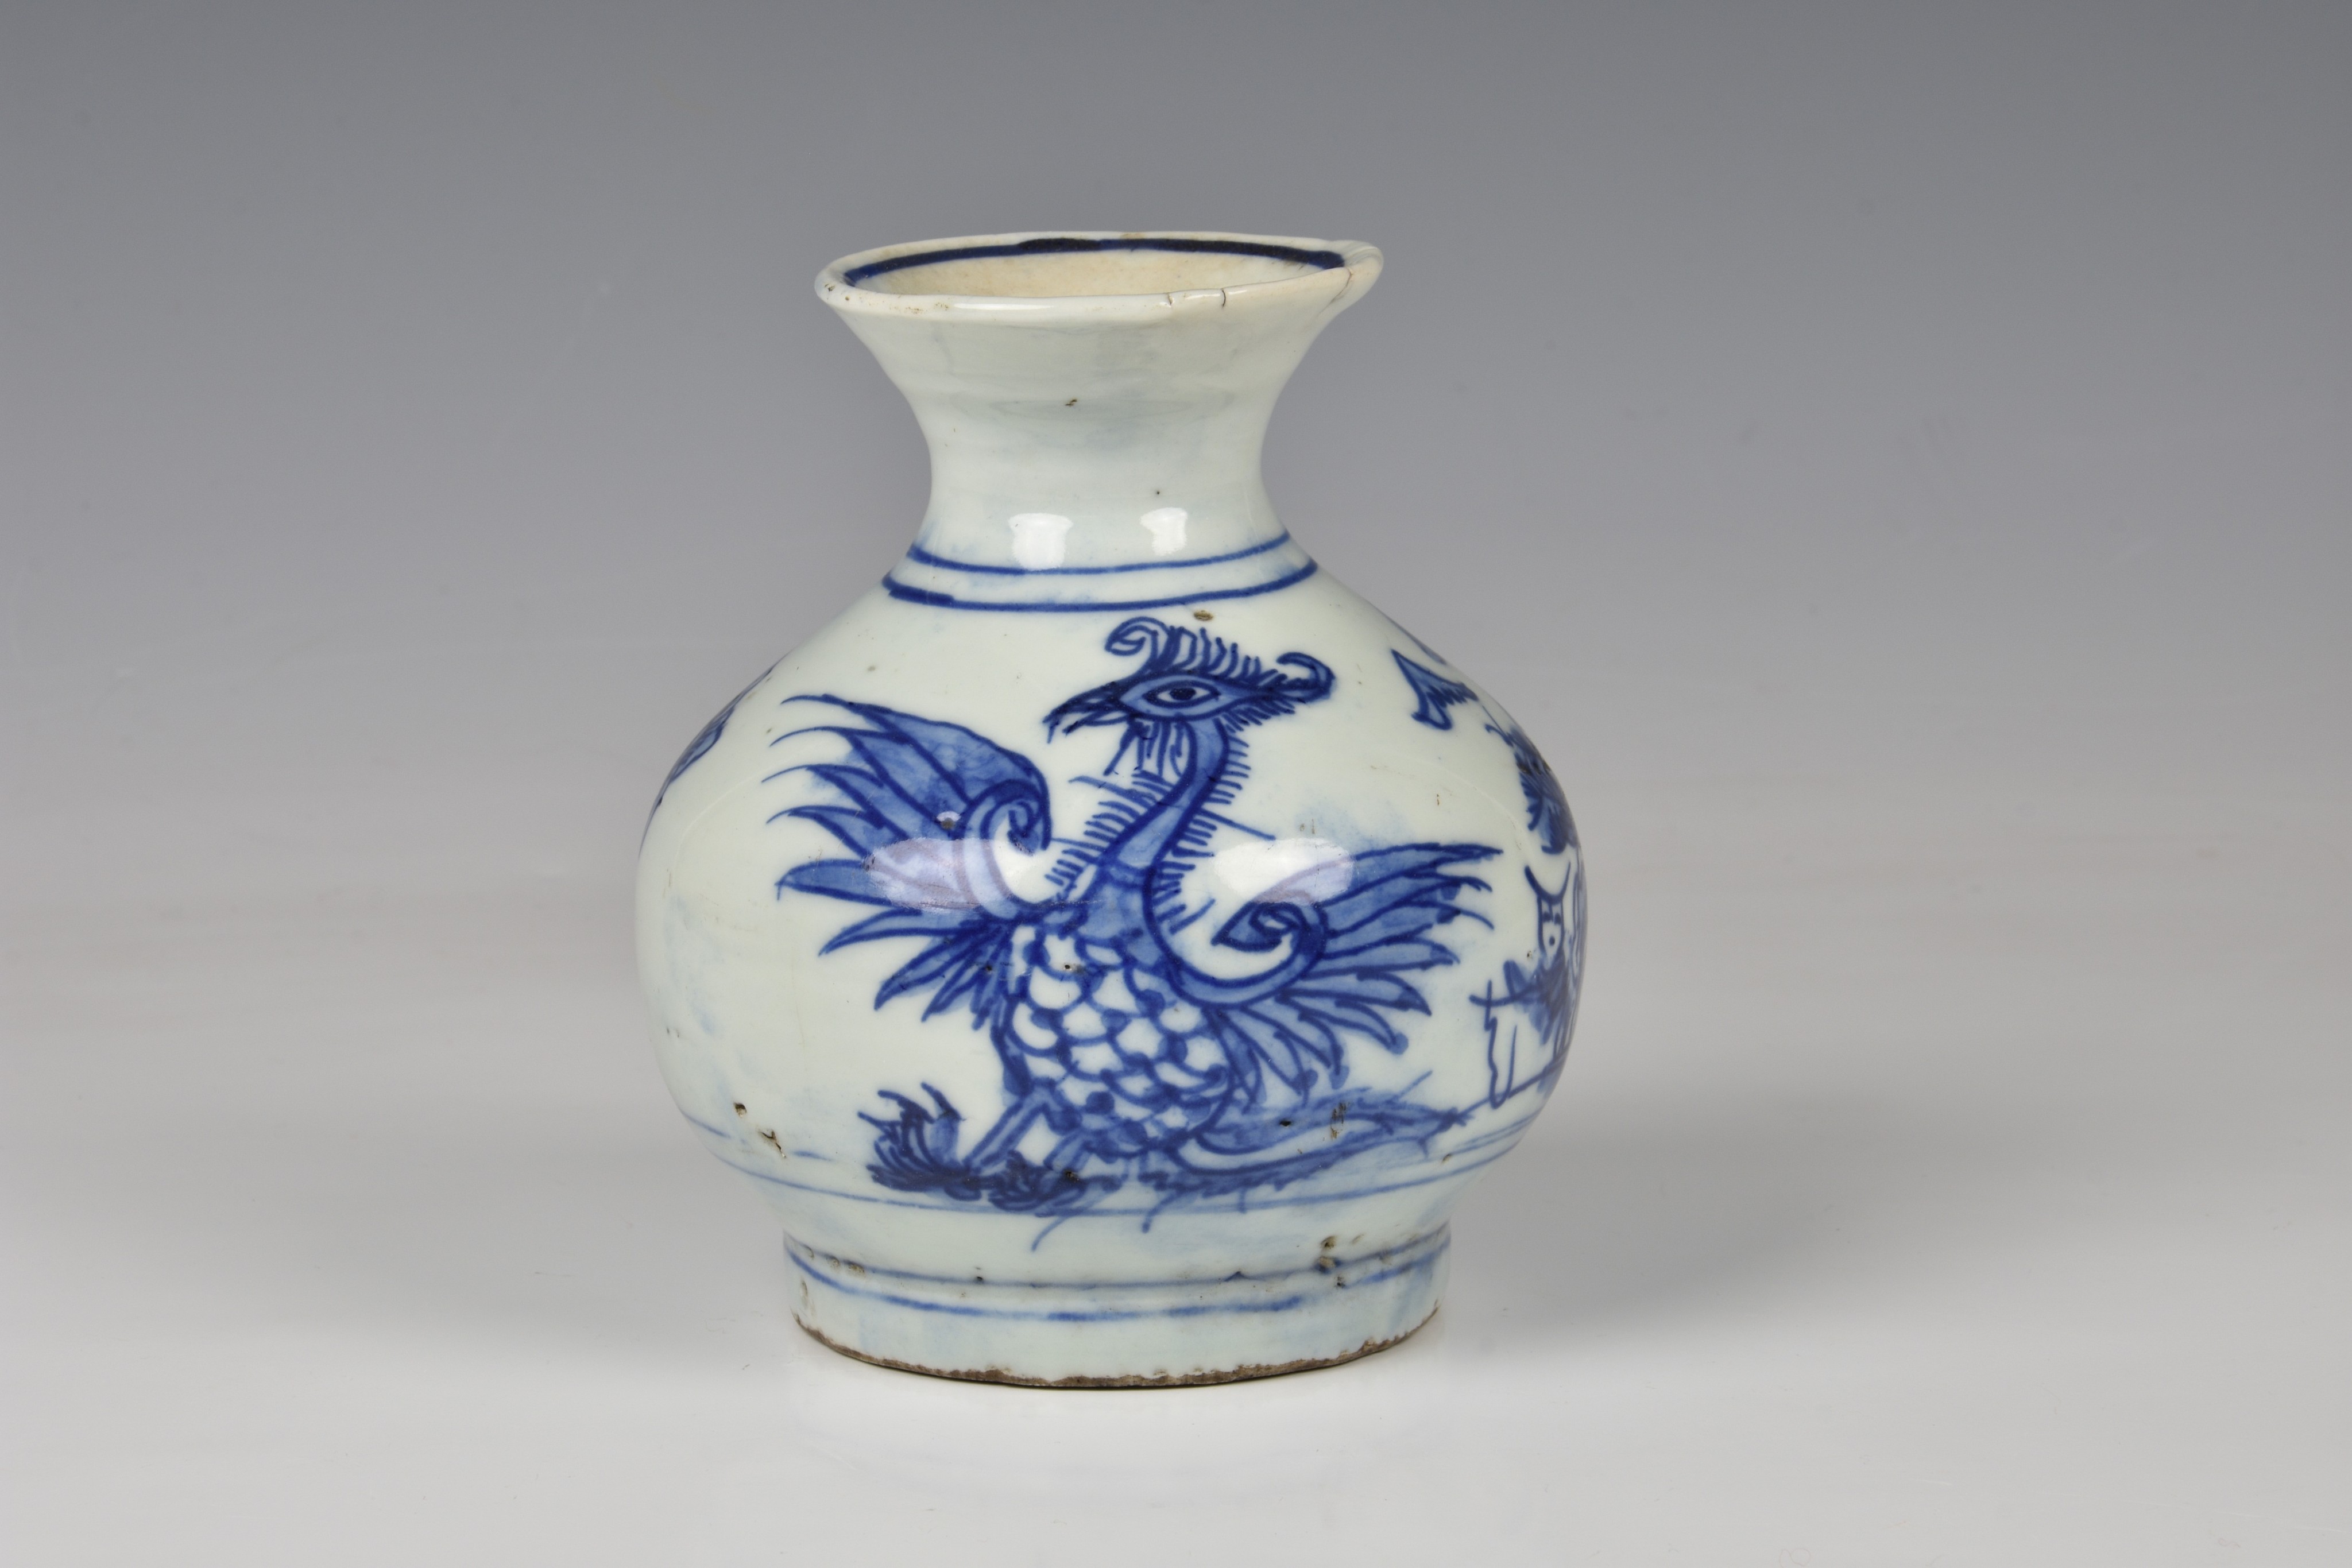 A Chinese blue and white porcelain vase, 19th / early 20th century, of stout, baluster form, painted - Image 2 of 5